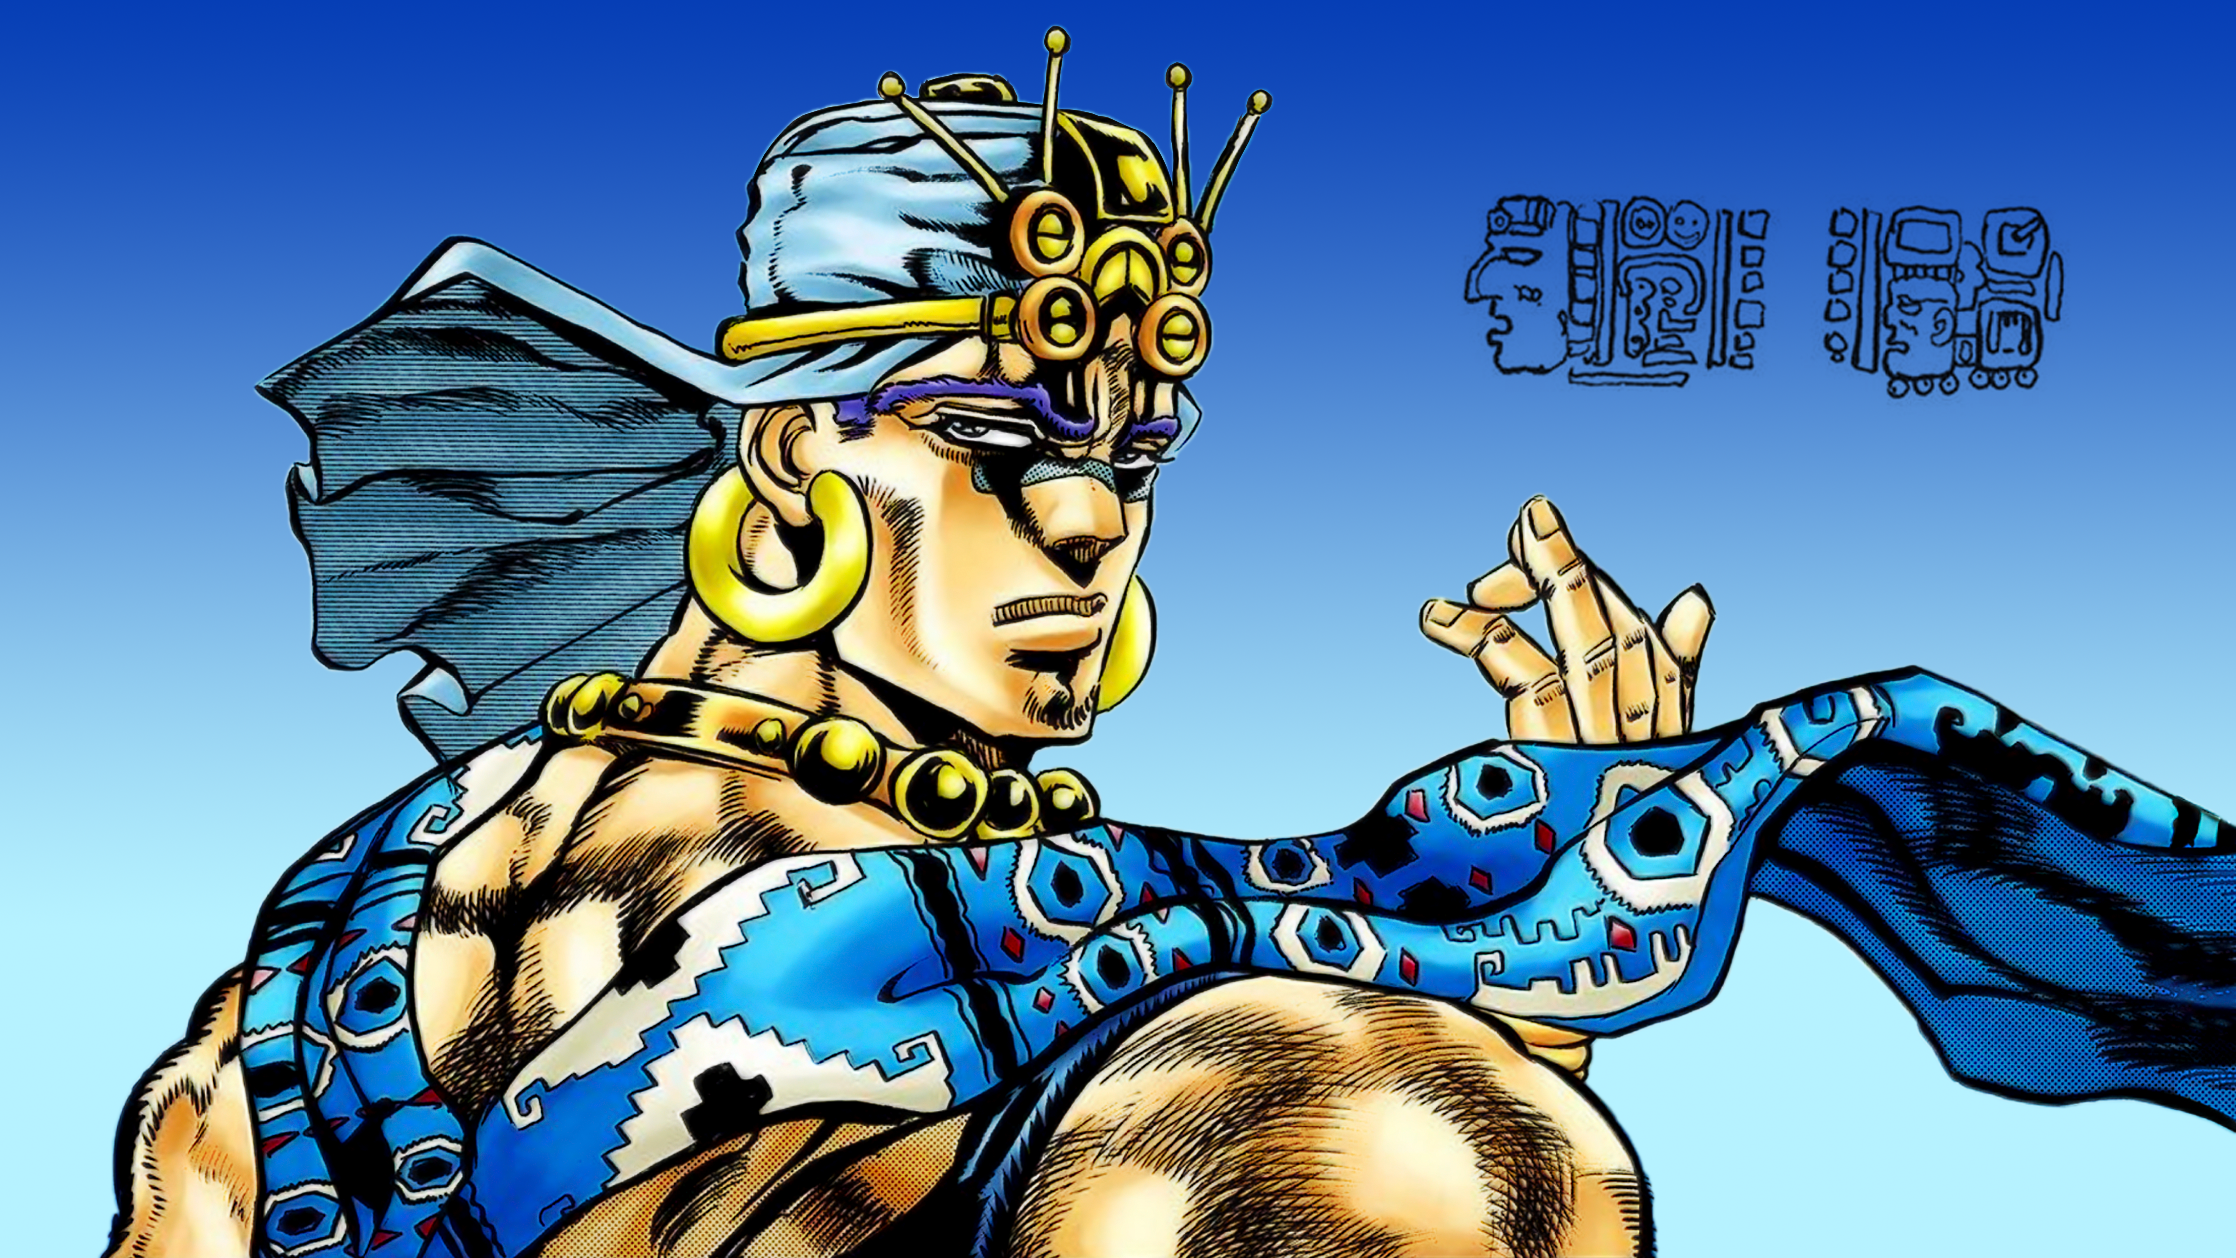 Posting a wallpaper a day until stone ocean is animated day 298: Wamuu